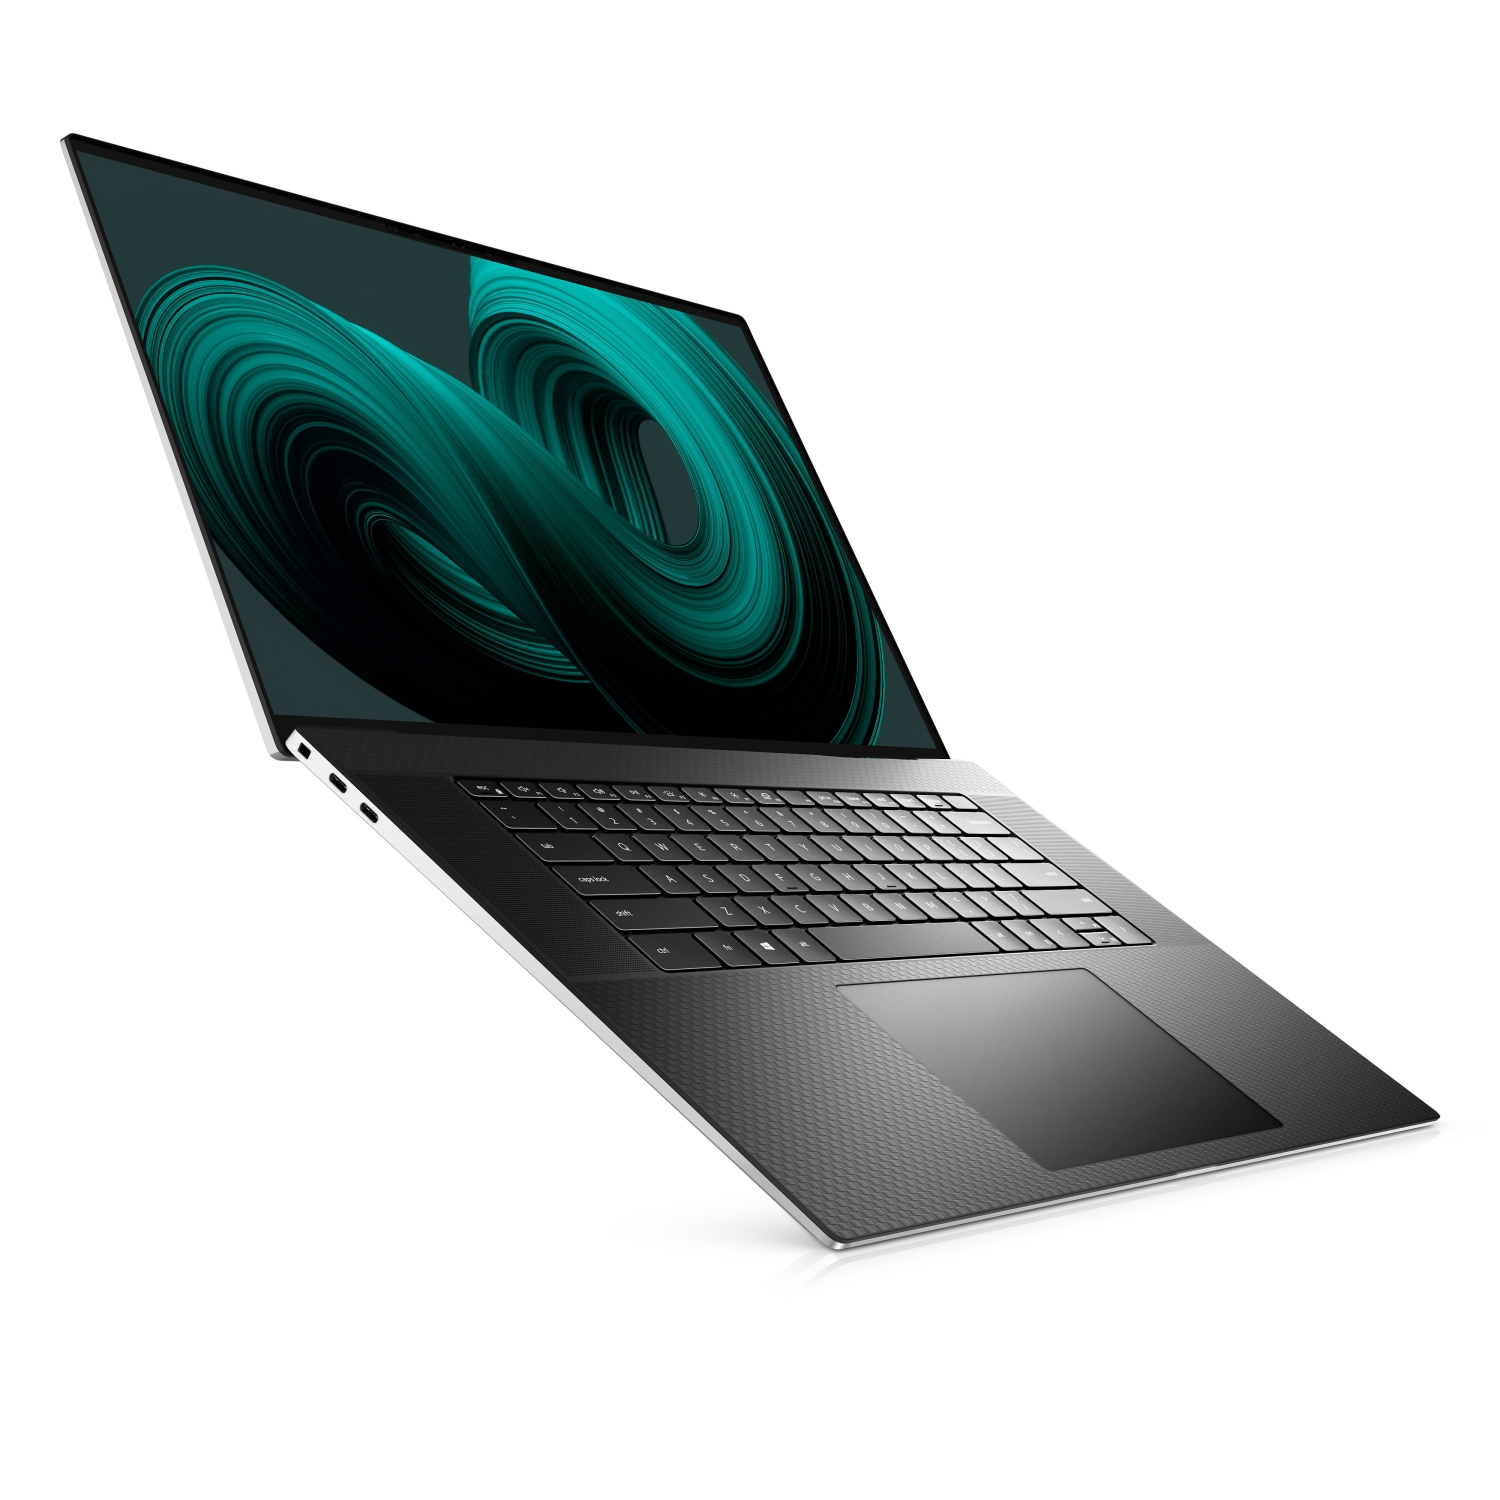 Refurbished (Excellent) - Dell XPS 17 9710 Laptop (2021) | 17" 4K Touch | Core i9 - 1TB SSD - 16GB RAM - RTX 3060 | 8 Cores @ 4.9 GHz - 11th Gen CPU Certified Refurbished